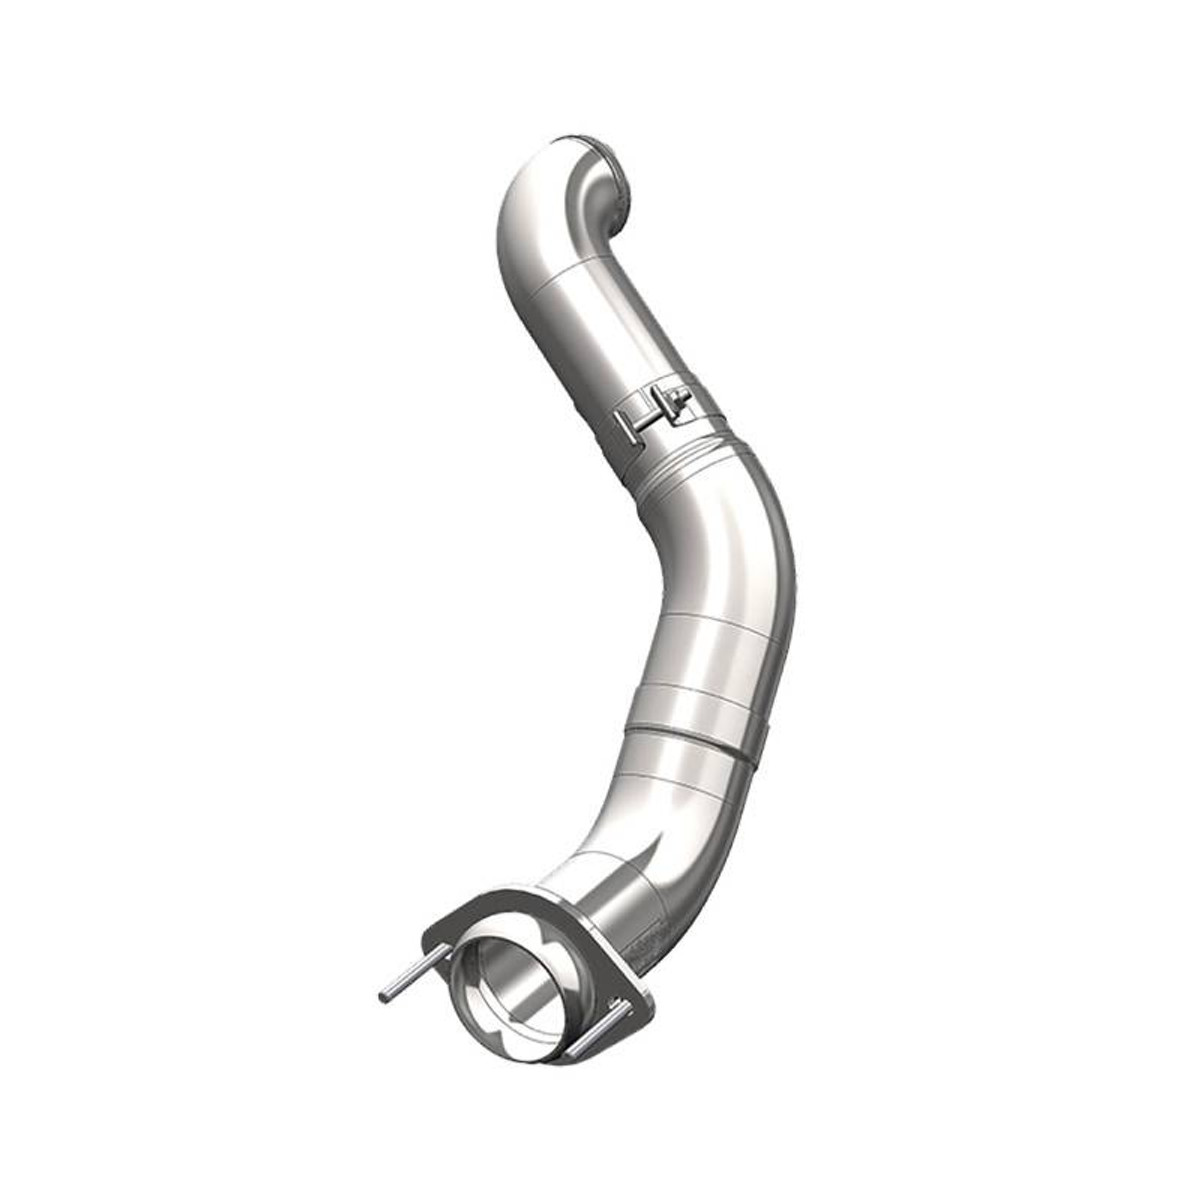 MBRP  - 4 Inch - T409 SS - Turbo Down Pipe - 2011-2015 Ford 6.7L Powerstroke CARB EO Num. D-763-1 FS9CA459